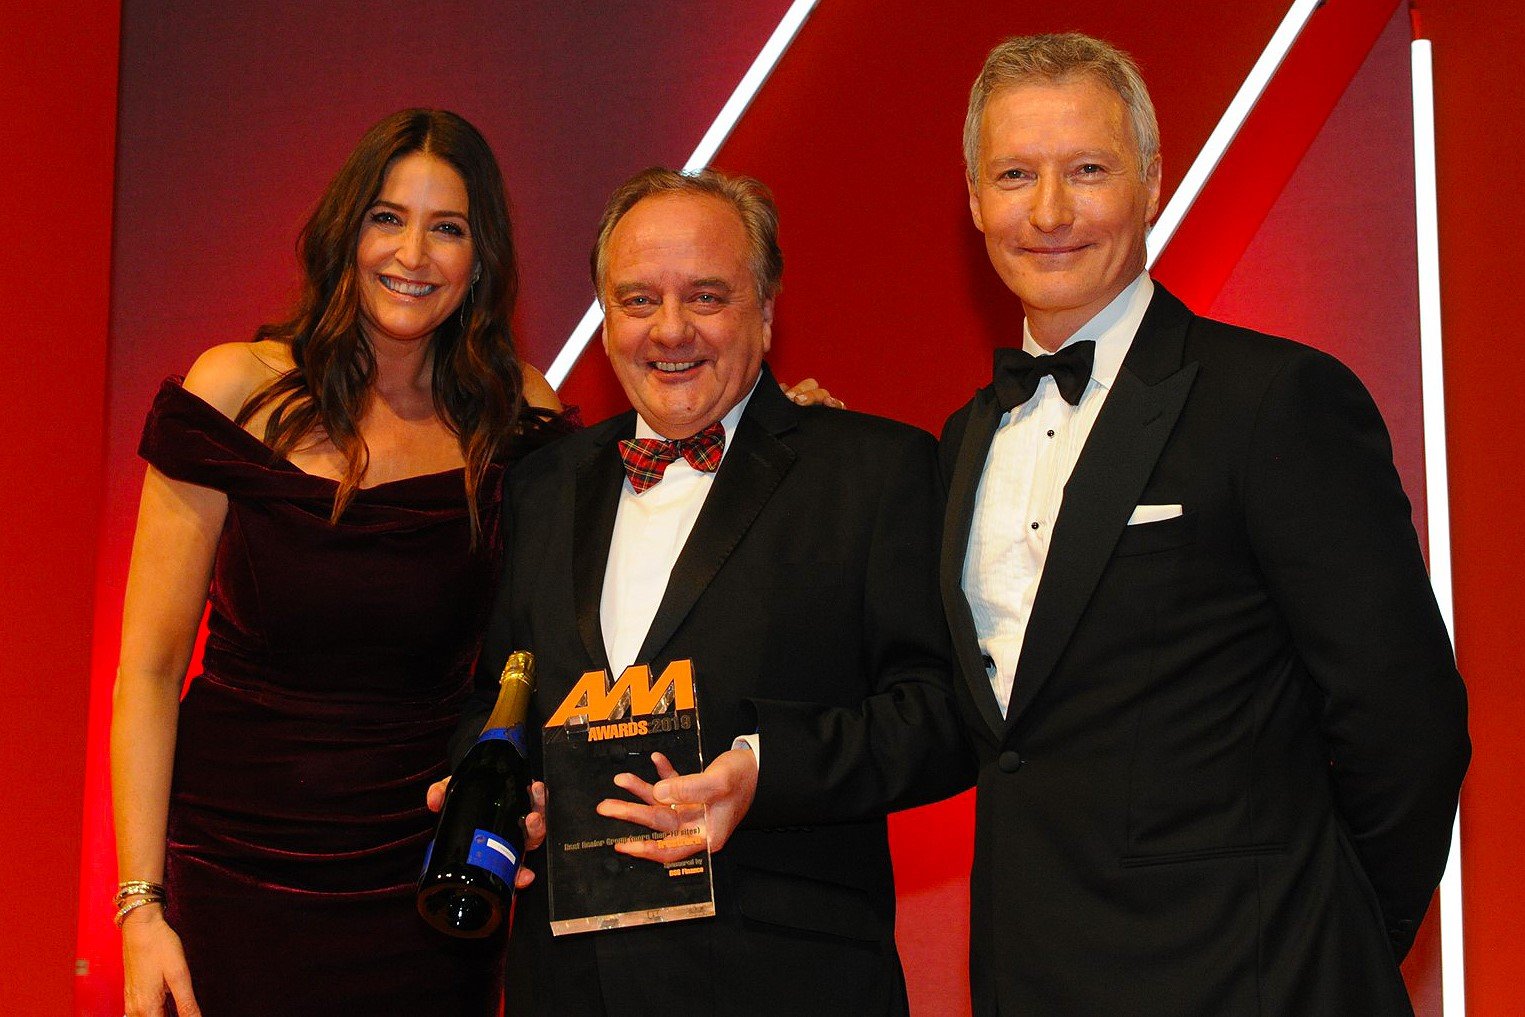 Stuart Foulds, chairman and chief executive, TrustFord, accepts the award from Mark Gow, sales director, DSG Finance, right, and host Lisa Snowdon, left